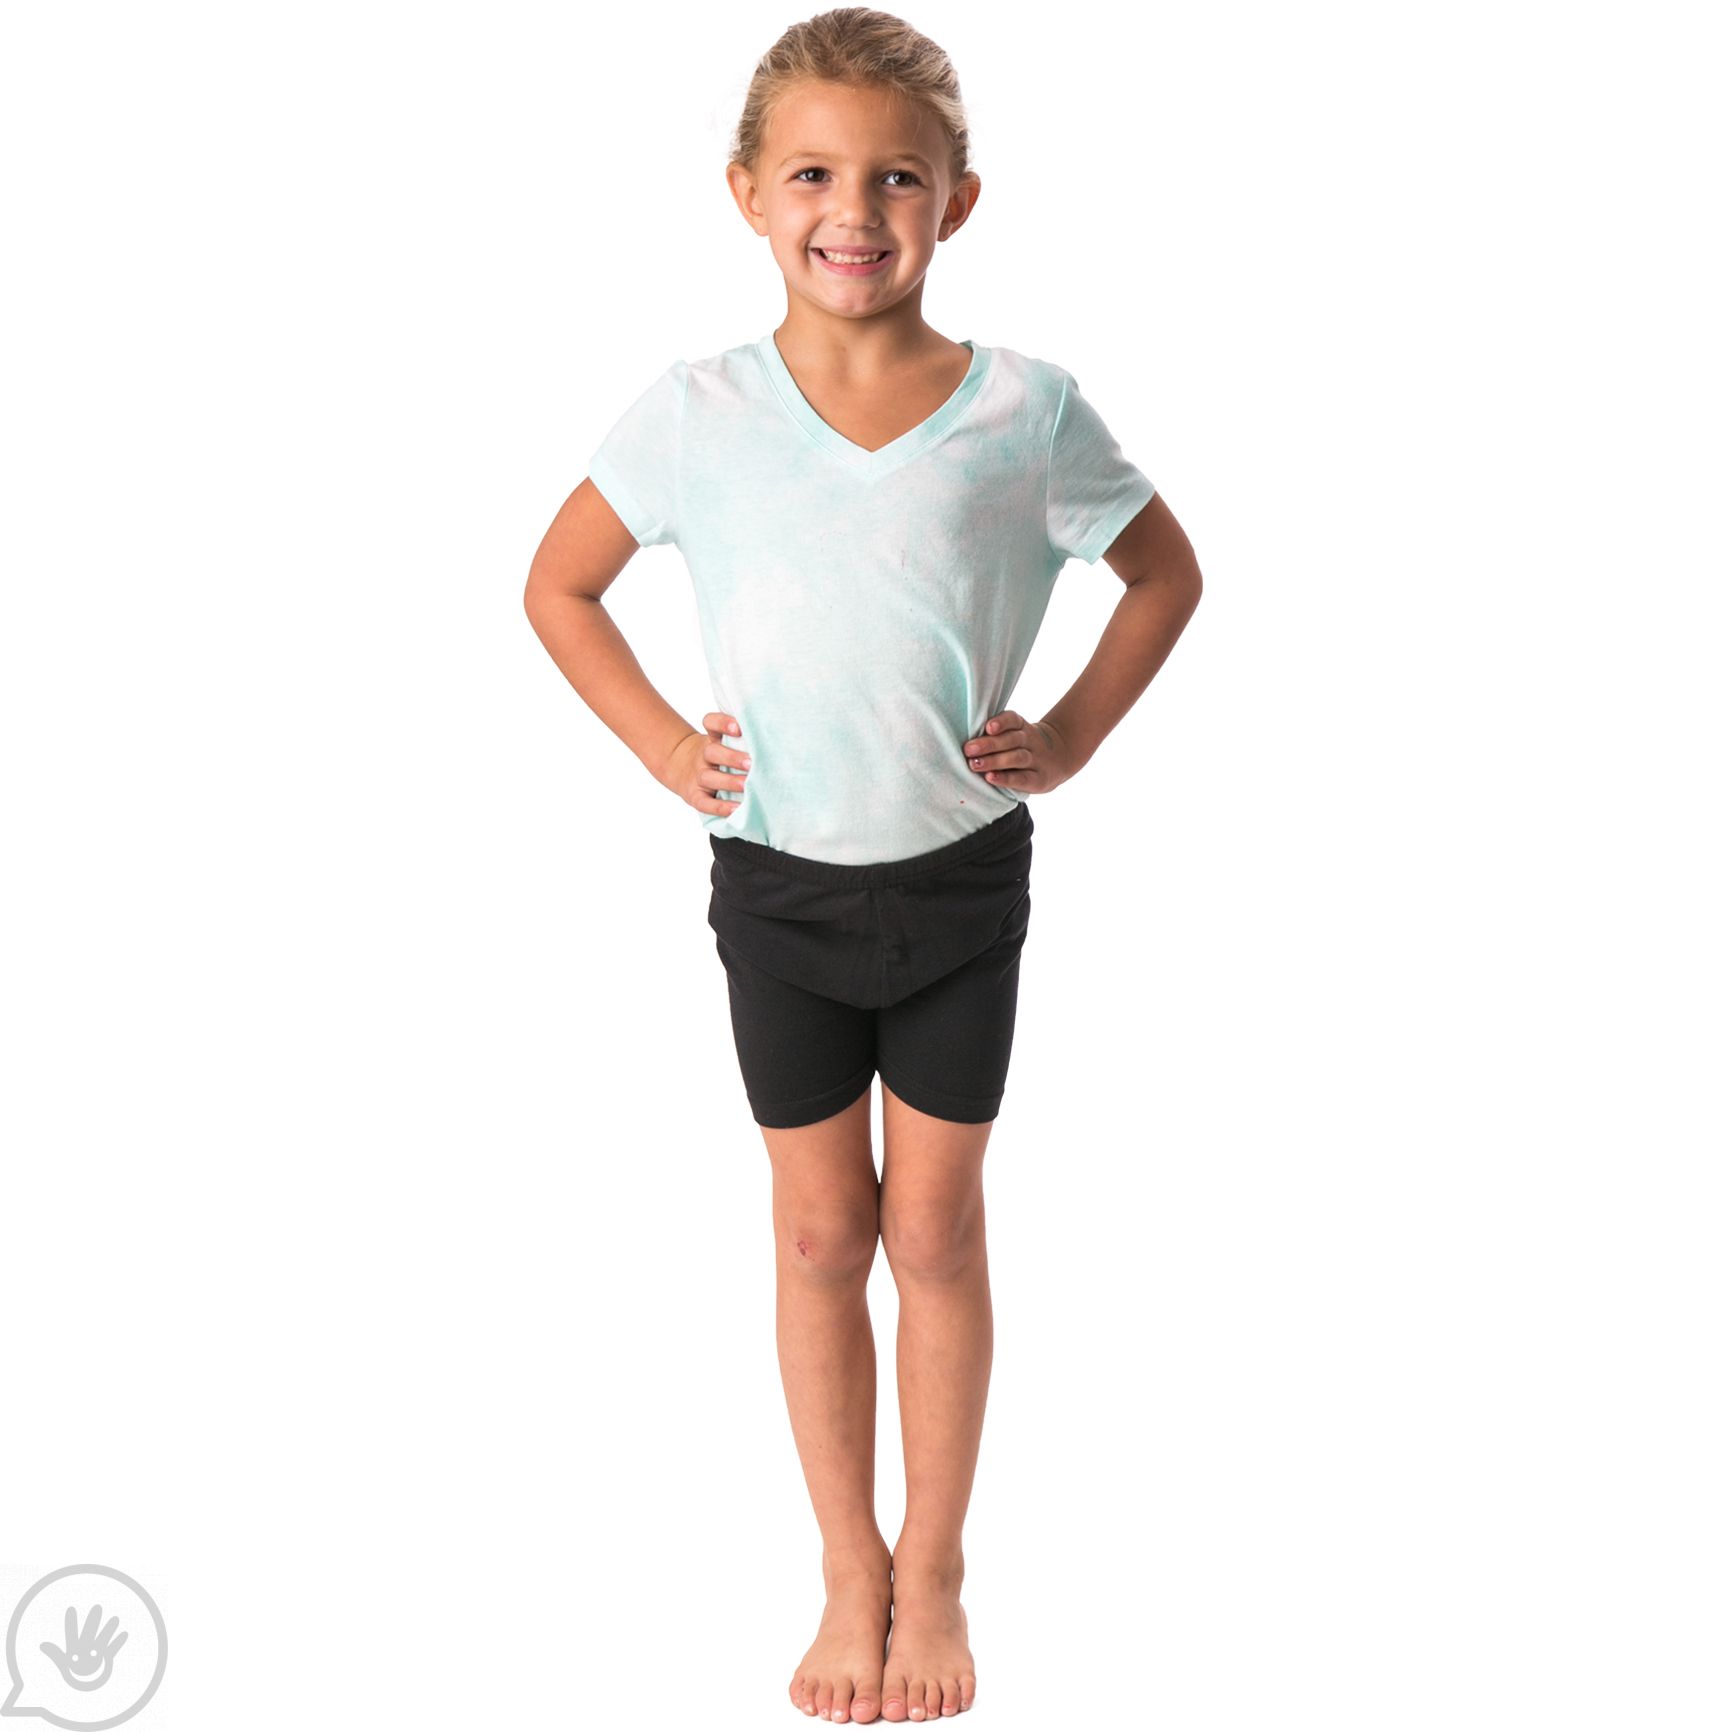 Compression Undershirt for Kids with ADHD, Sensory Processing